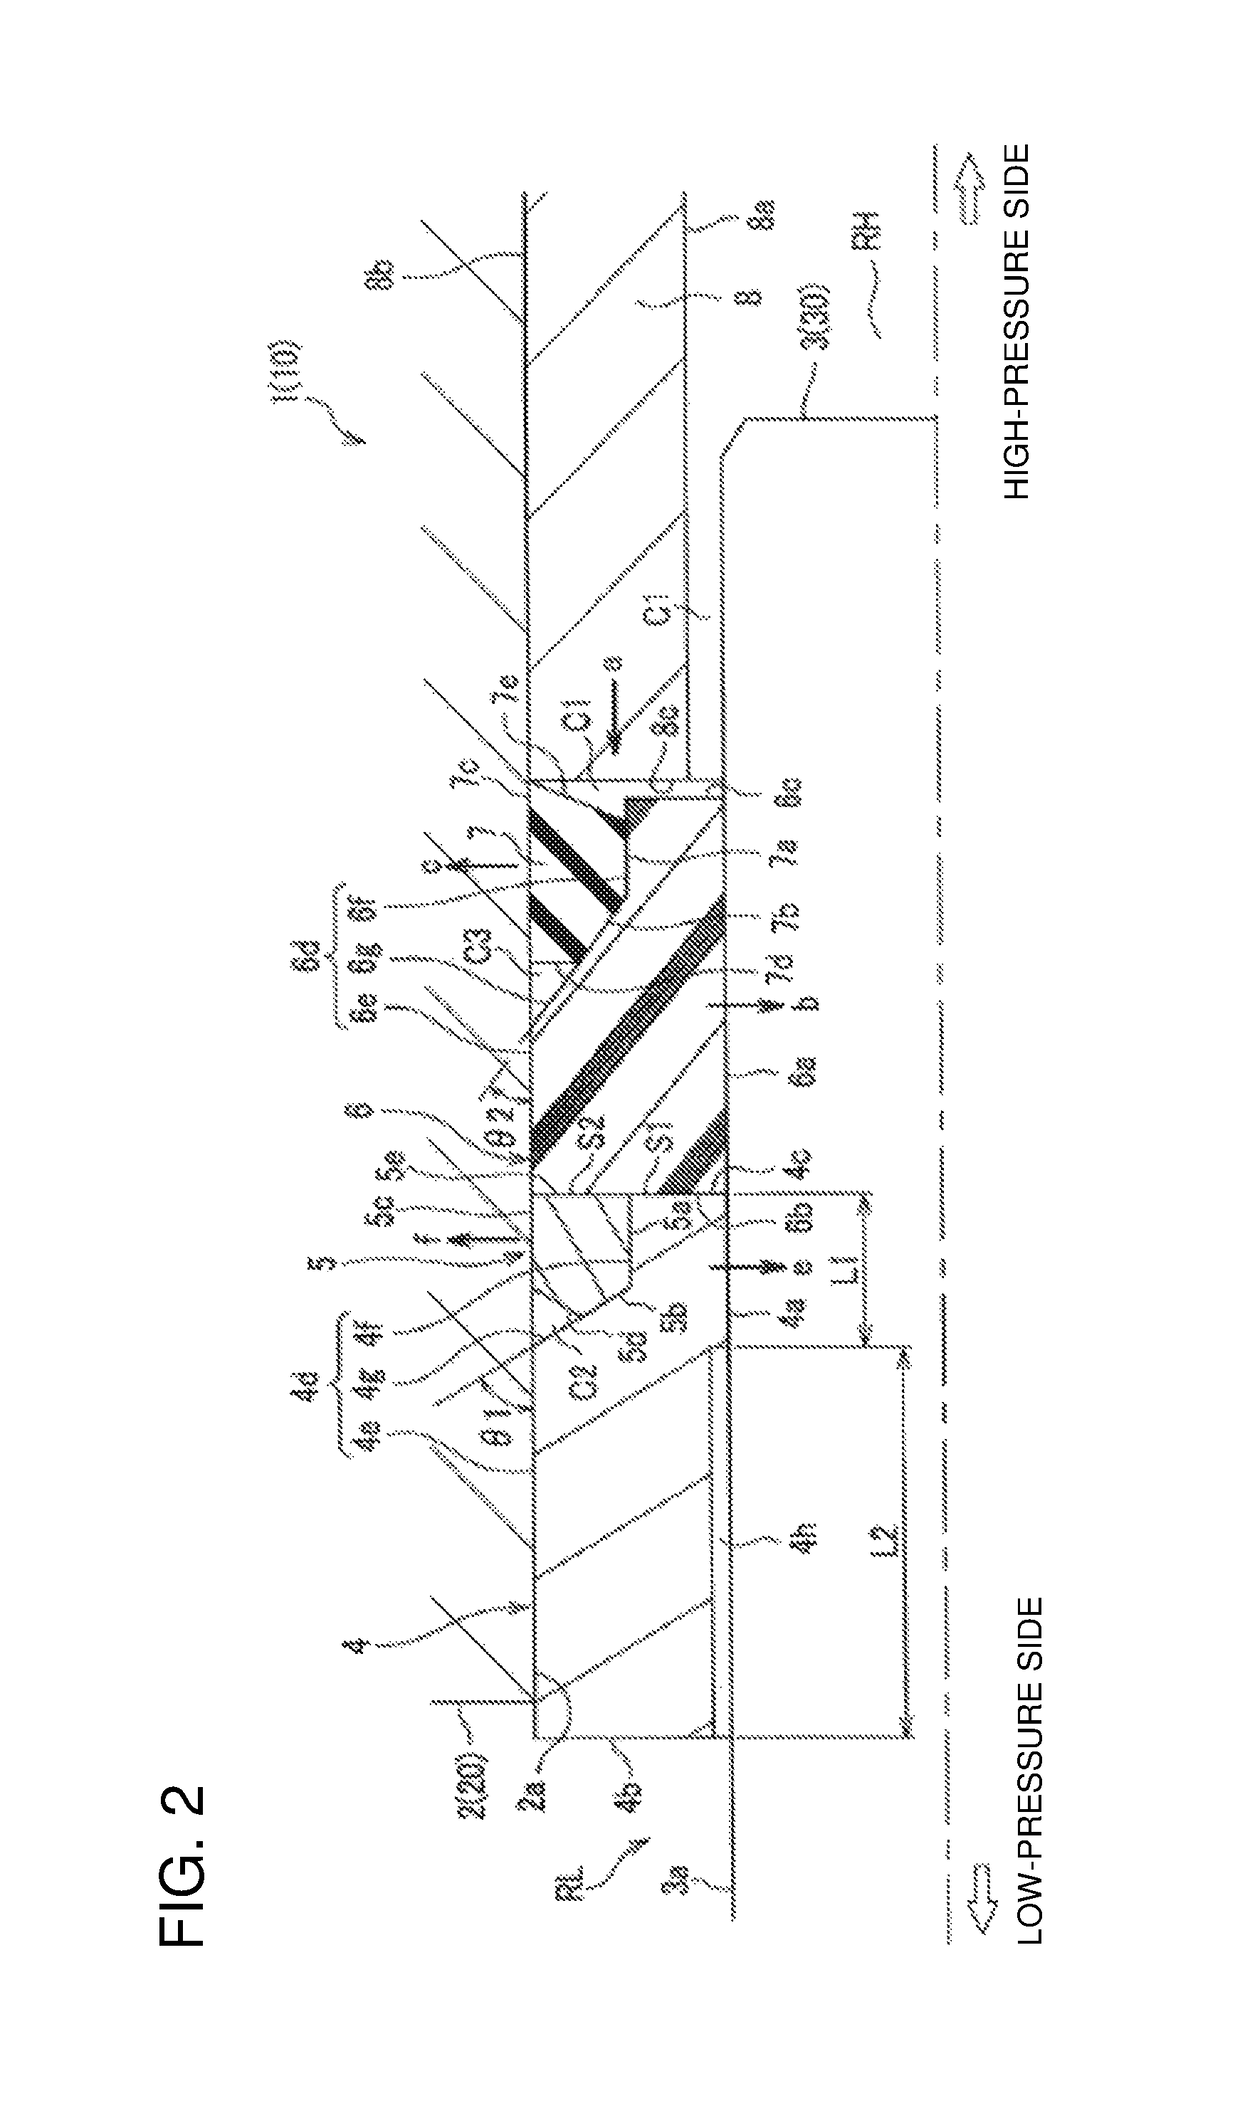 Ultrahigh-pressure sealing device and reciprocating pump